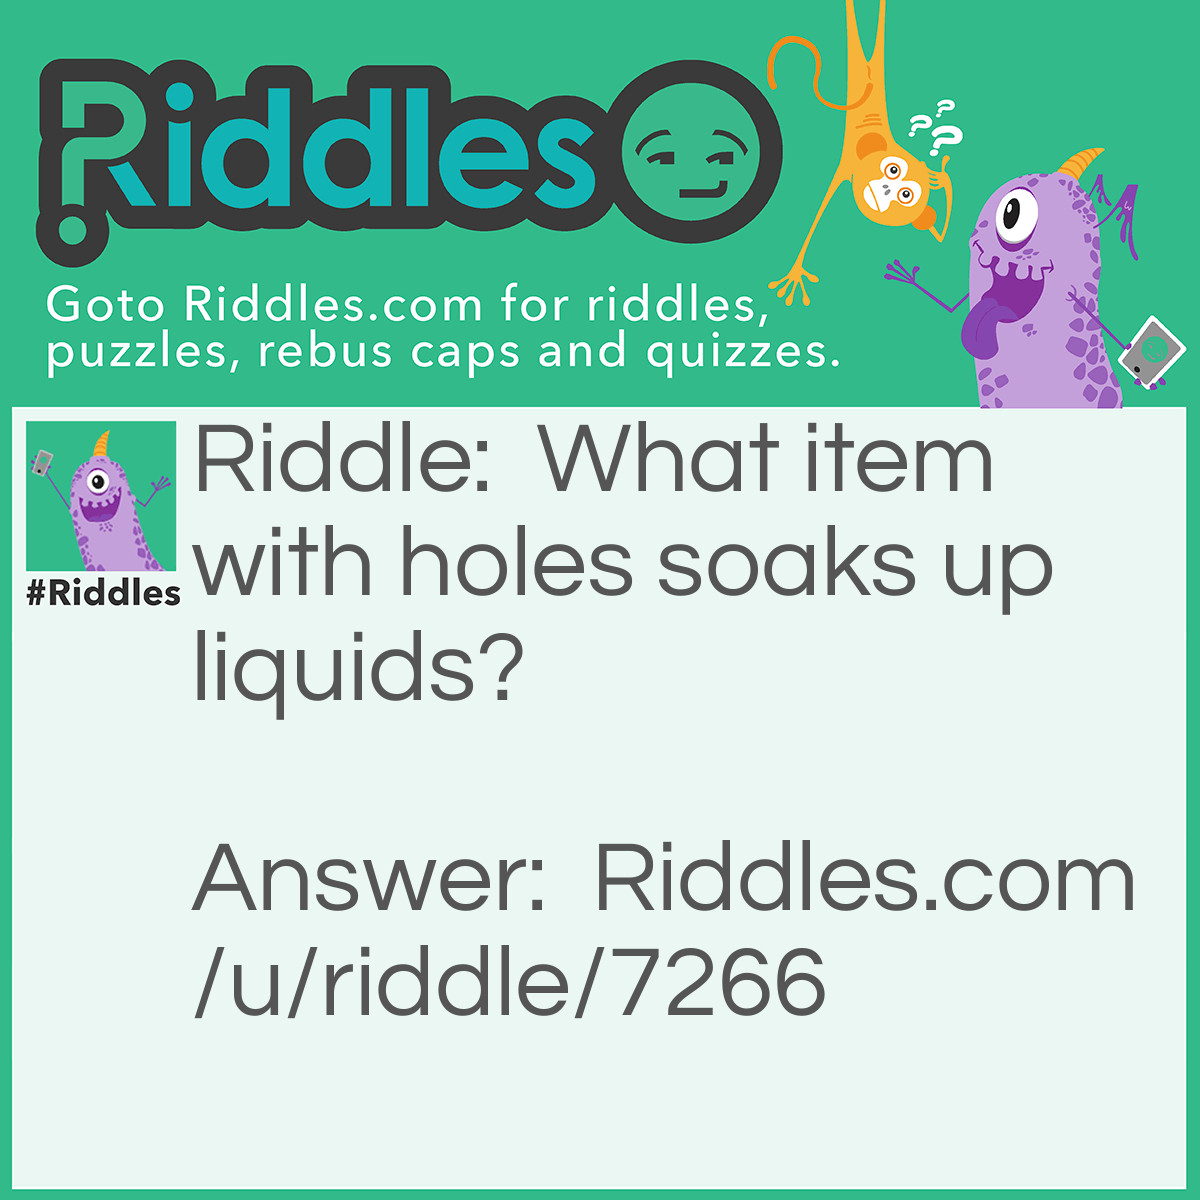 Riddle: What item with holes soaks up liquids? Answer: A sponge.